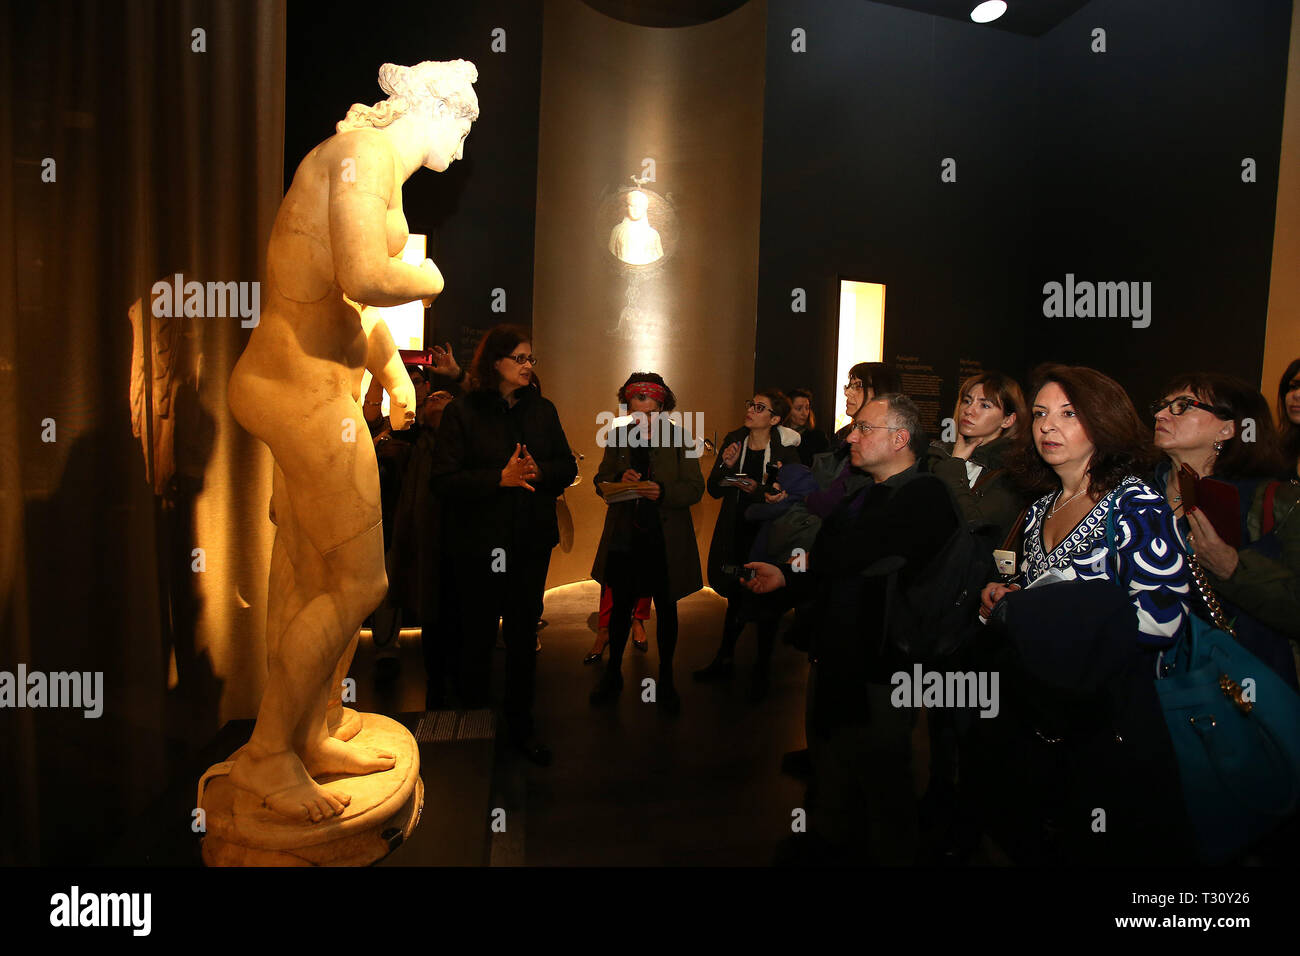 (190405) -- ATHENS, April 5, 2019 (Xinhua) -- Members of the Greek press look at a Roman statue of Greek goddess Aphrodite, which is displayed for the first time at the exhibition 'The Countless Aspects of Beauty' held by the National Archaeological Museum, in Athens, Greece, April 4, 2019. A marble statue of the Greek ancient goddess Aphrodite along with two scents from antiquity were unveiled at the National Archaeological Museum of Greece on Thursday to mark one-year anniversary of the temporary exhibition 'The countless aspects of Beauty.'   TO GO WITH 'Feature: Aphrodite statue on maiden  Stock Photo